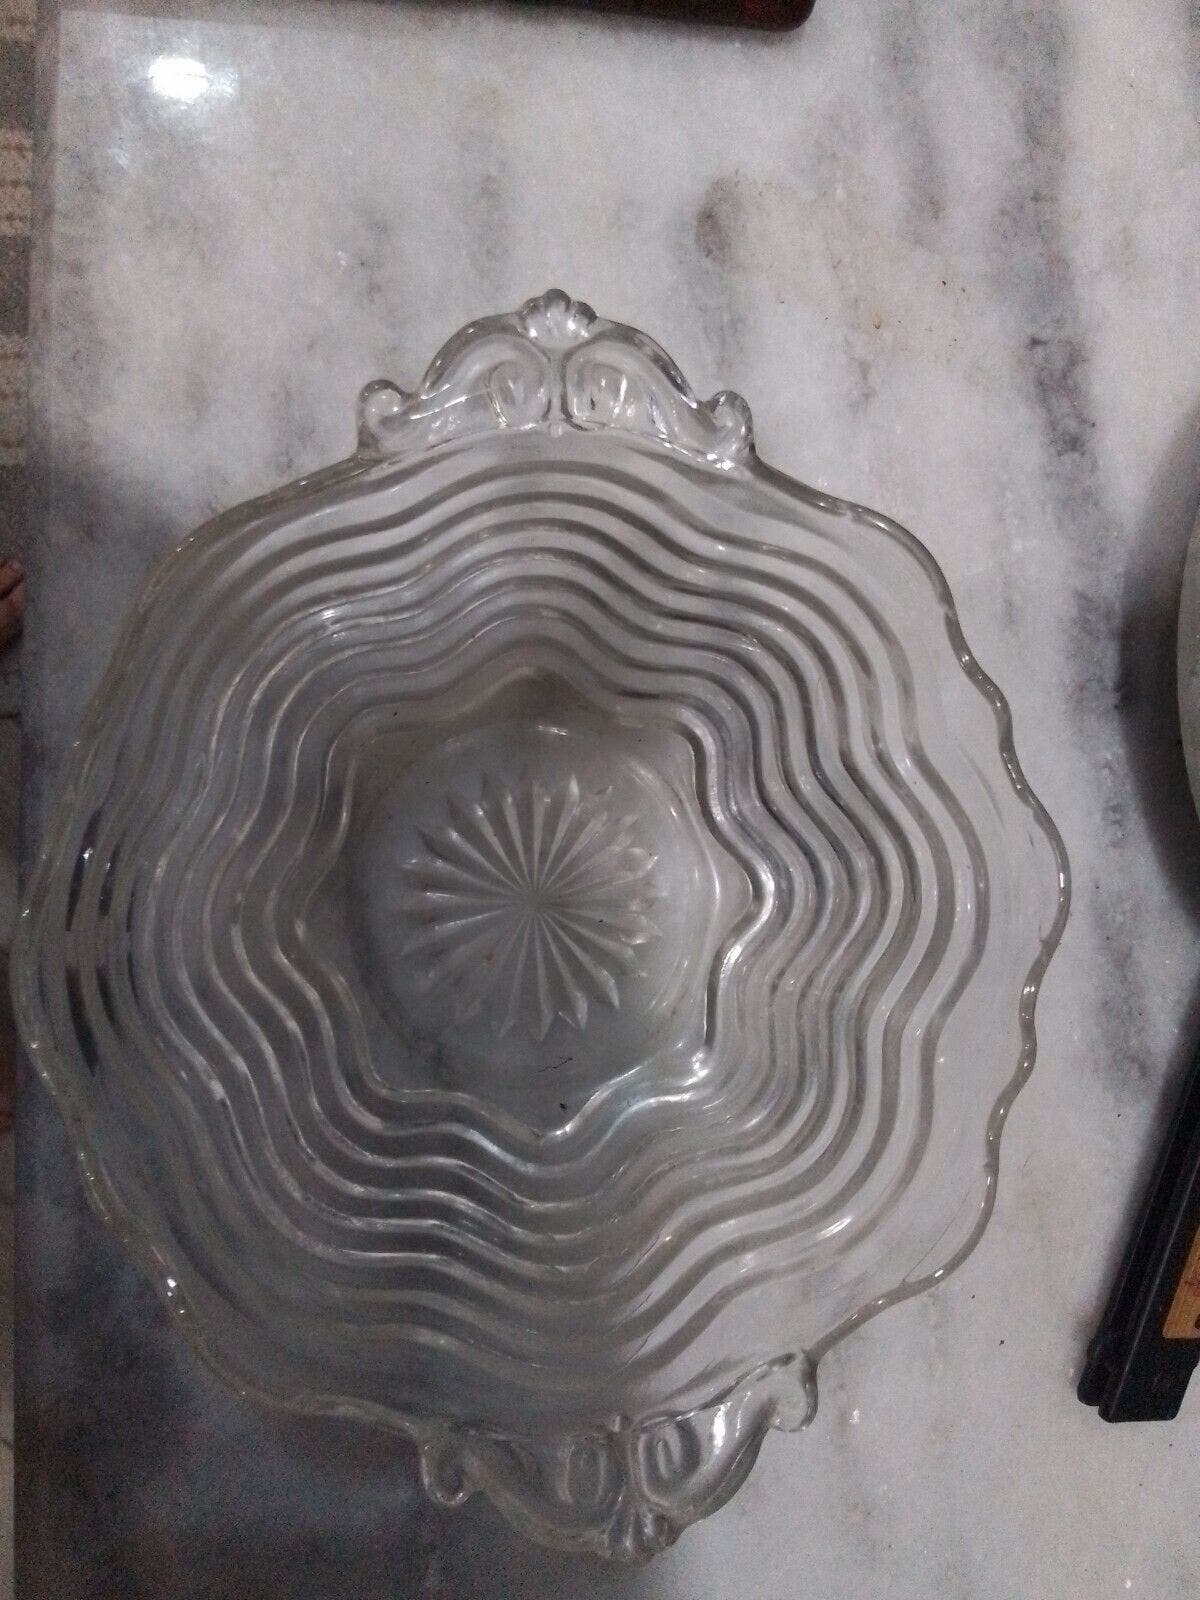 Primary image for Anchor Hocking Wavy Glass Line #17 Clear Handled Dish 7", Vintage Serving Tray